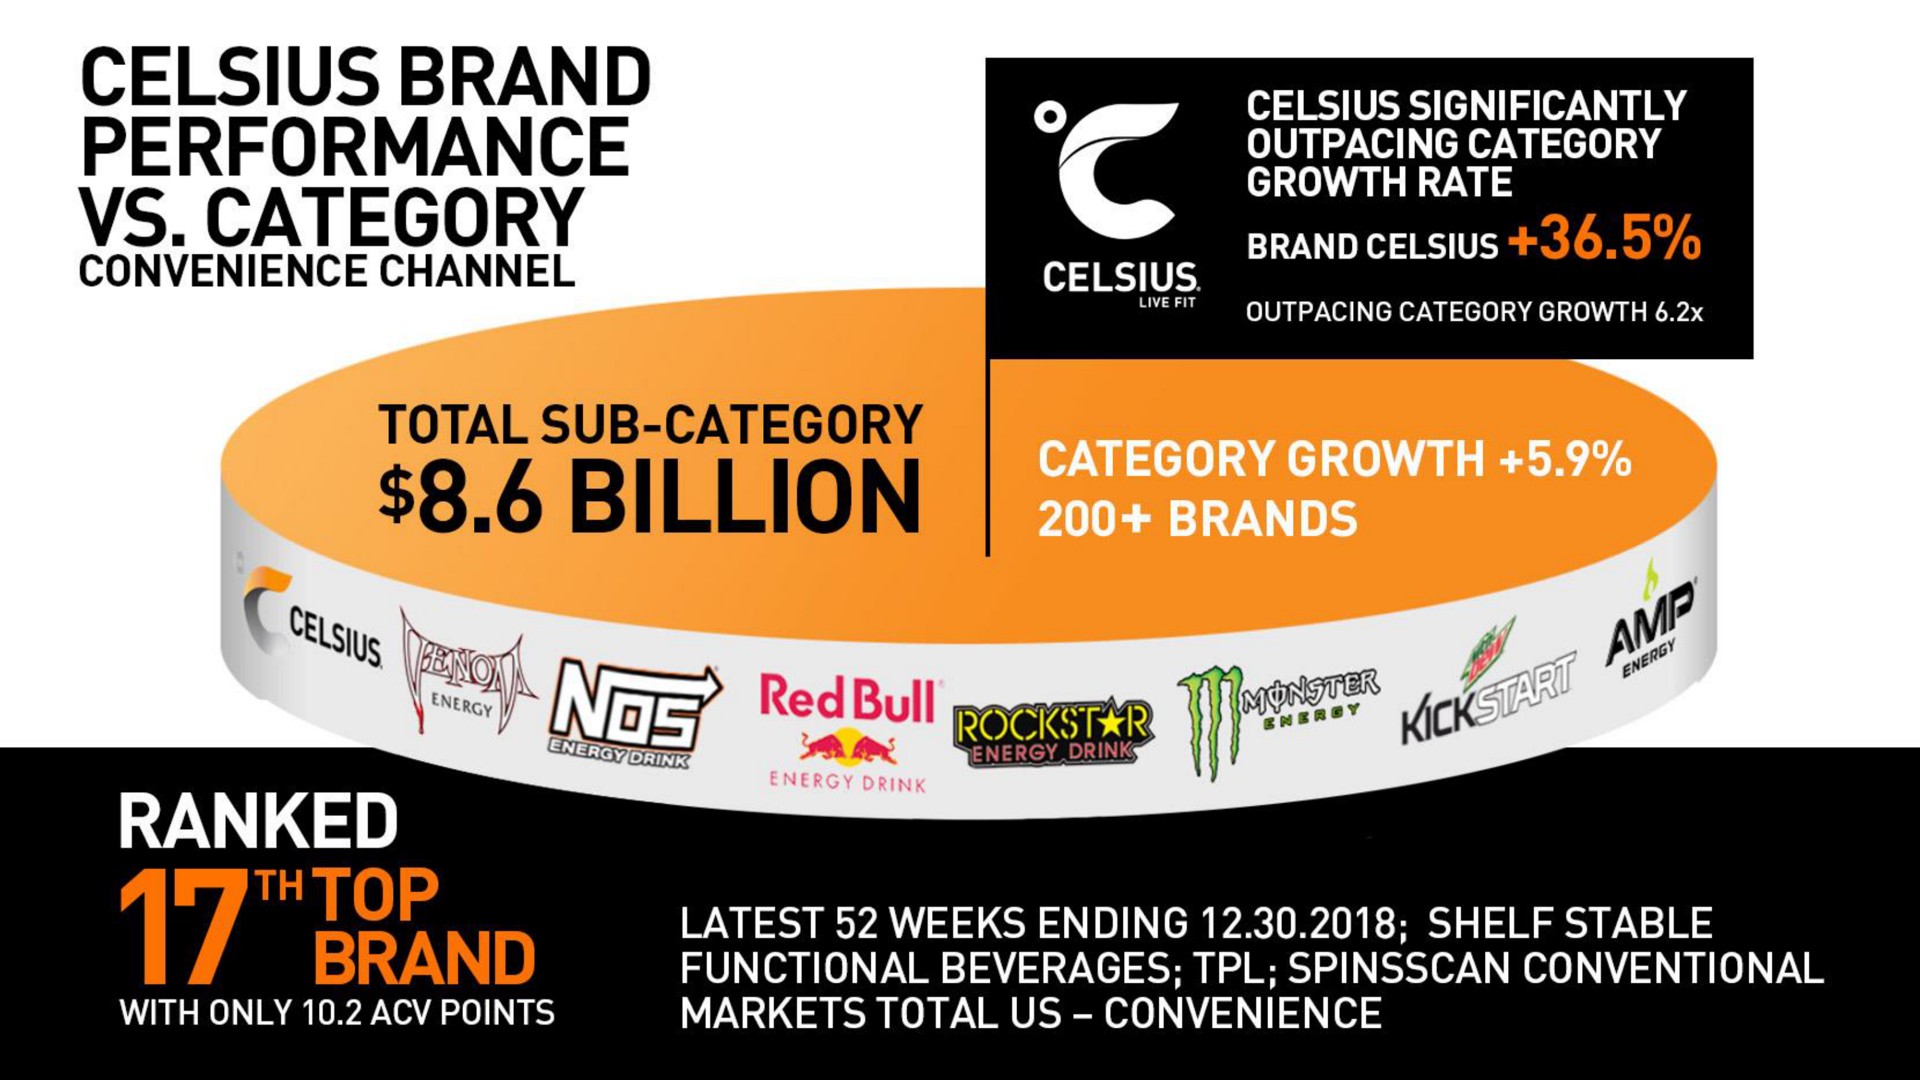 brand performance category convenience channel a all outpacing category are total sub category billion era snot yer peerage latest weeks ending shelf stable functional beverages conventional ranked tal | Celsius Holdings